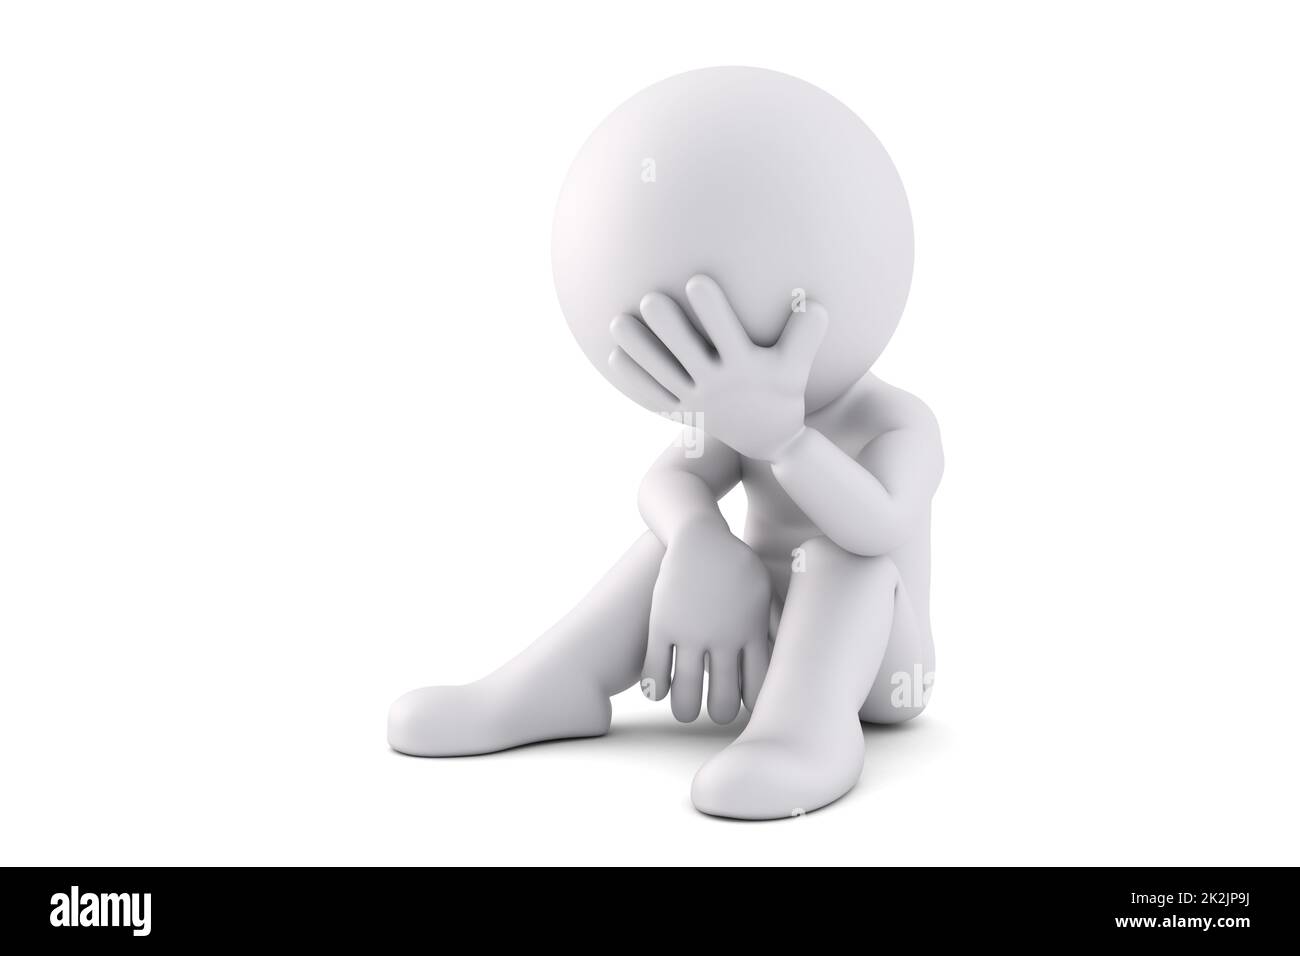 Sad guy. 3D illustration. Isolated. Contains clipping path Stock Photo